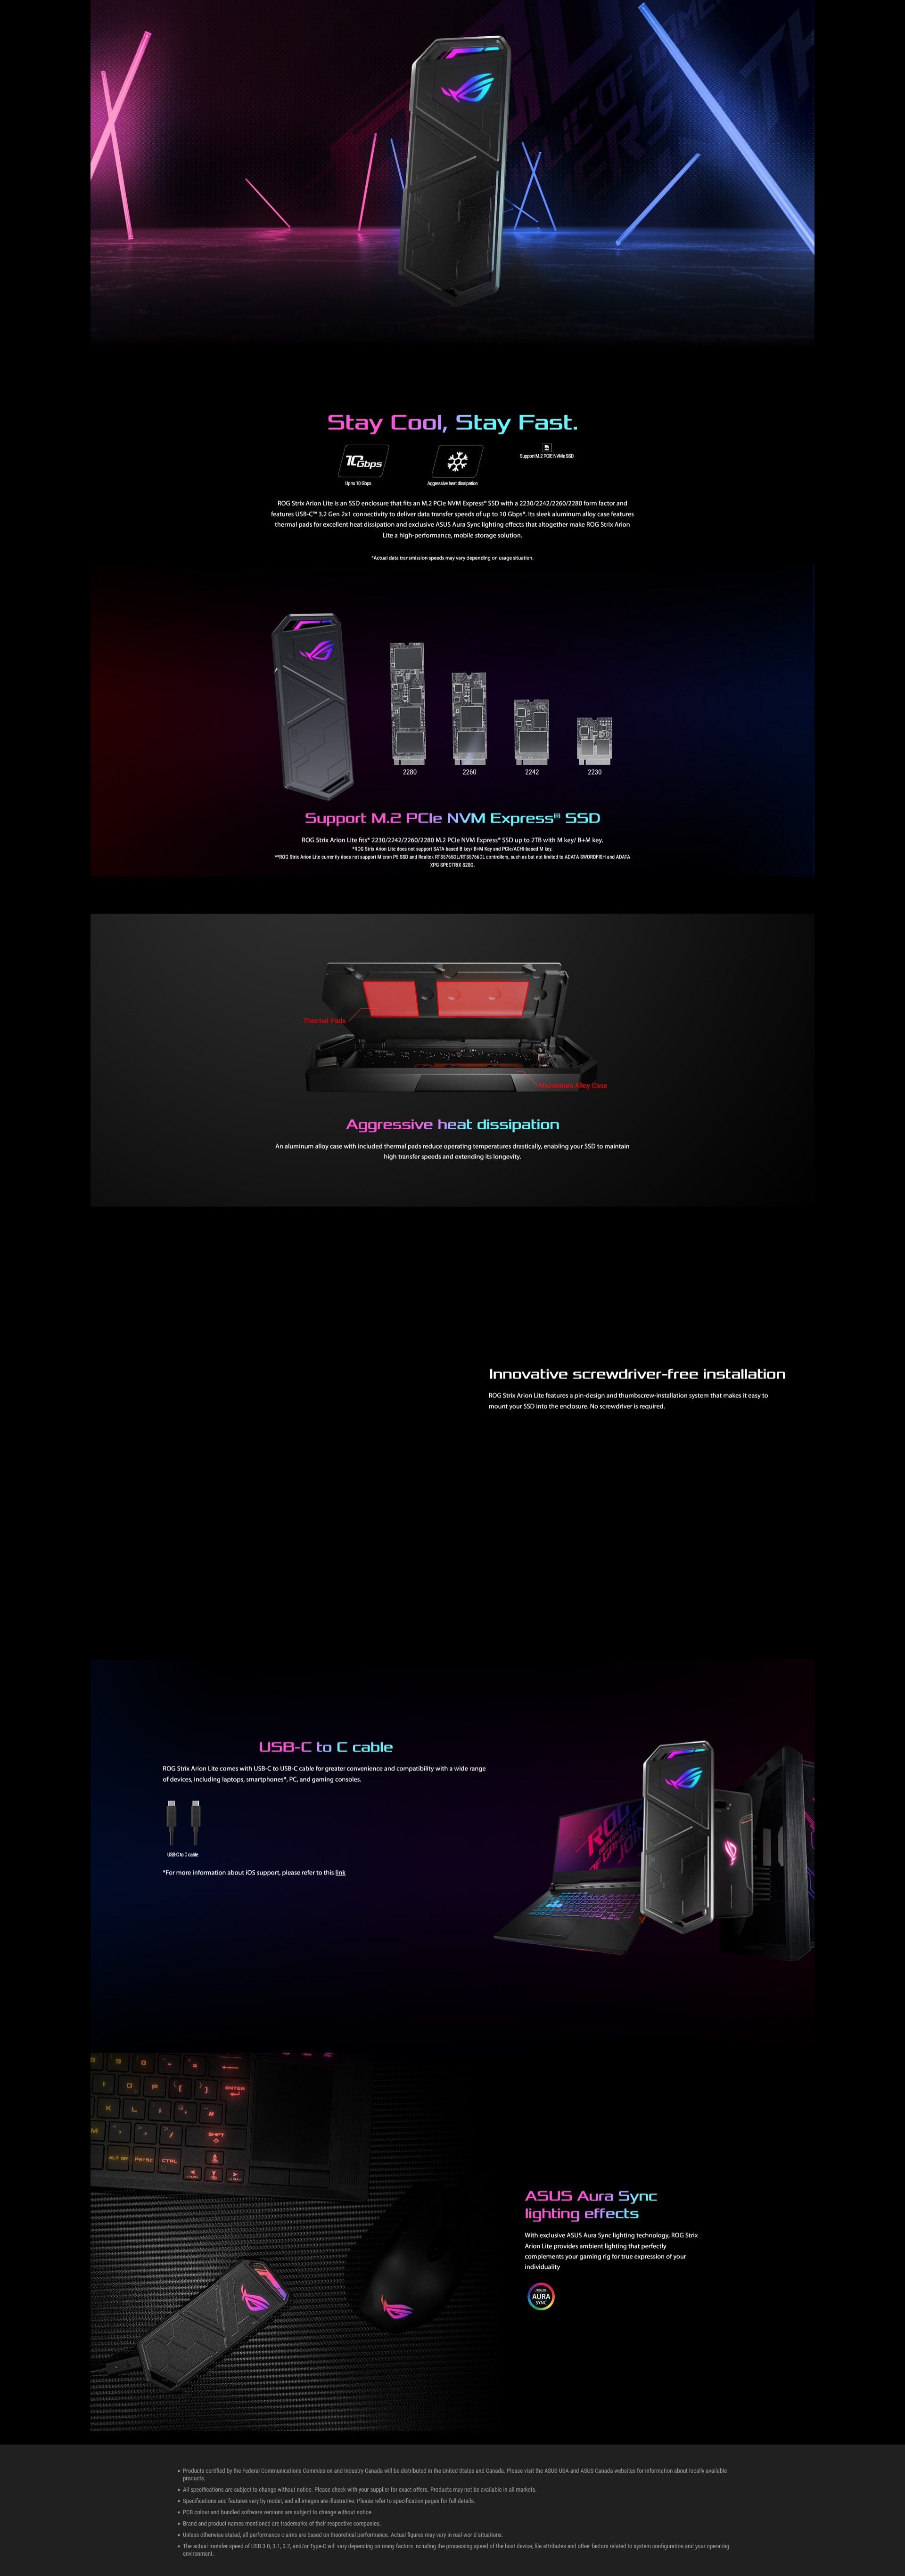 A large marketing image providing additional information about the product ASUS ROG Strix Arion Lite USB-C NMVe M.2 Enclosure - Additional alt info not provided